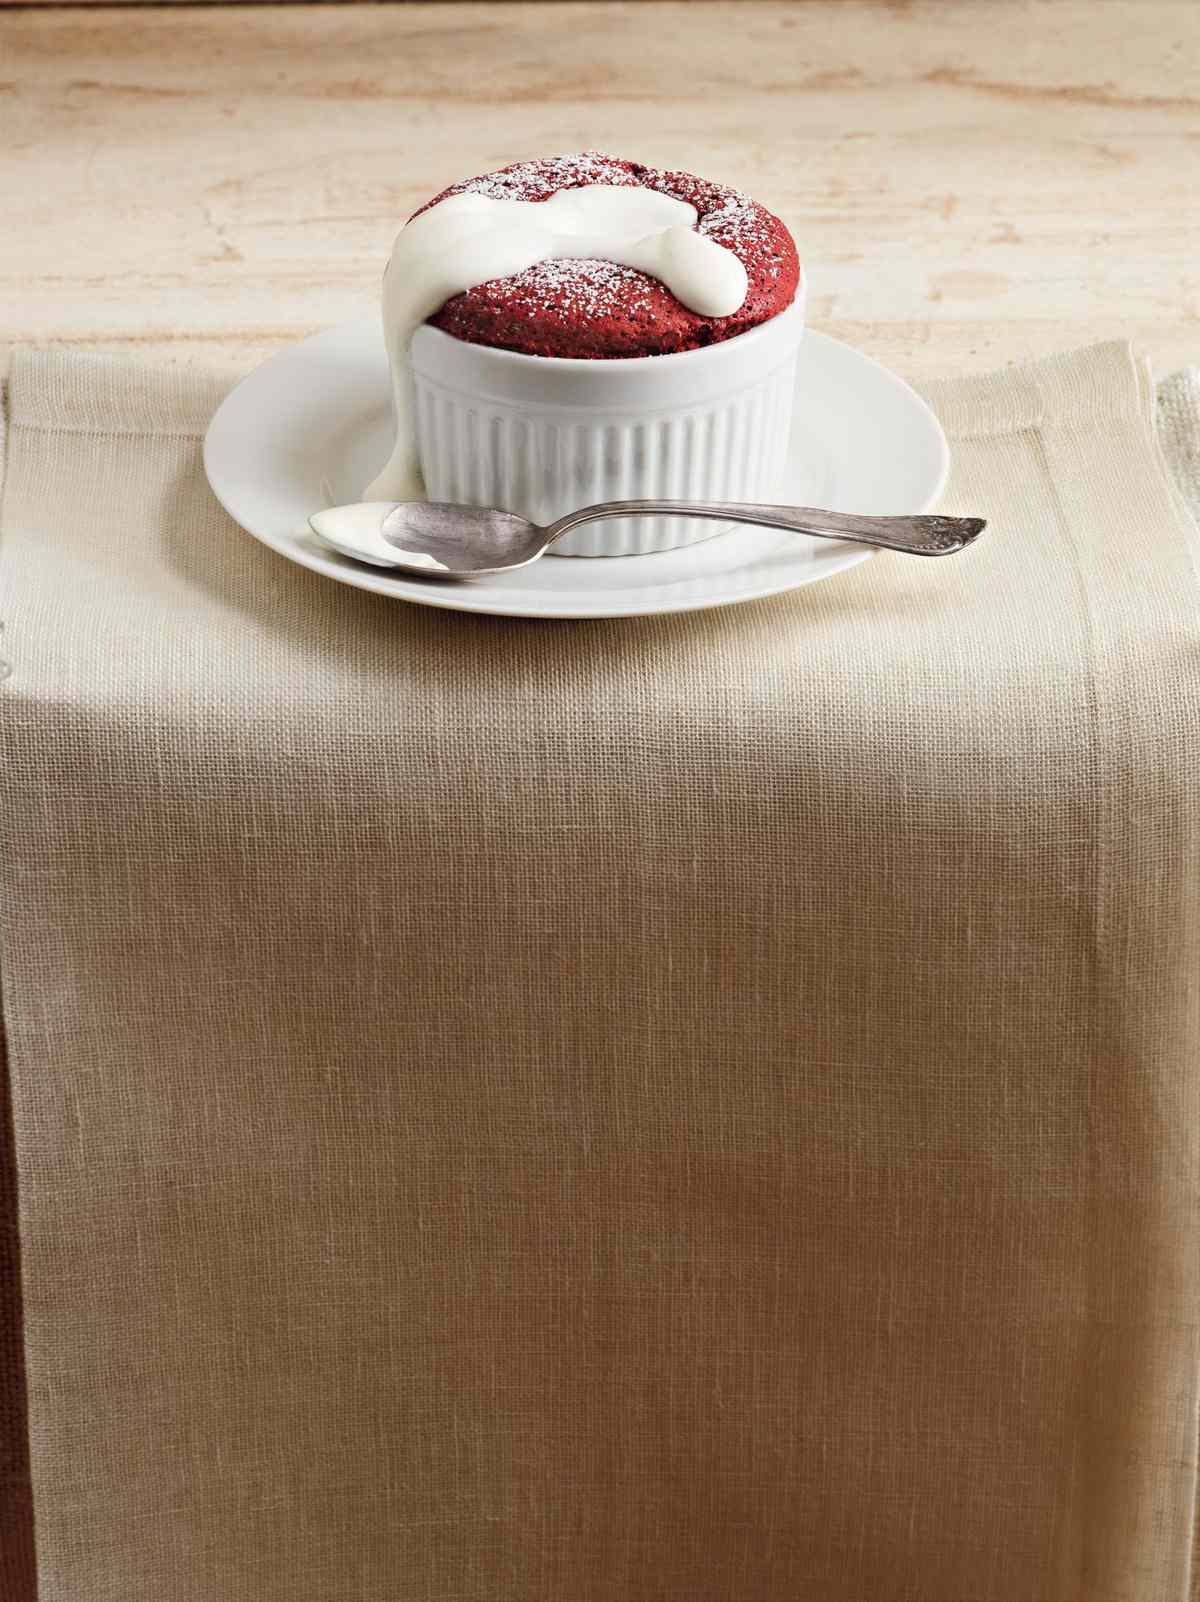 Red Velvet Souffles with Whipped Sour Cream